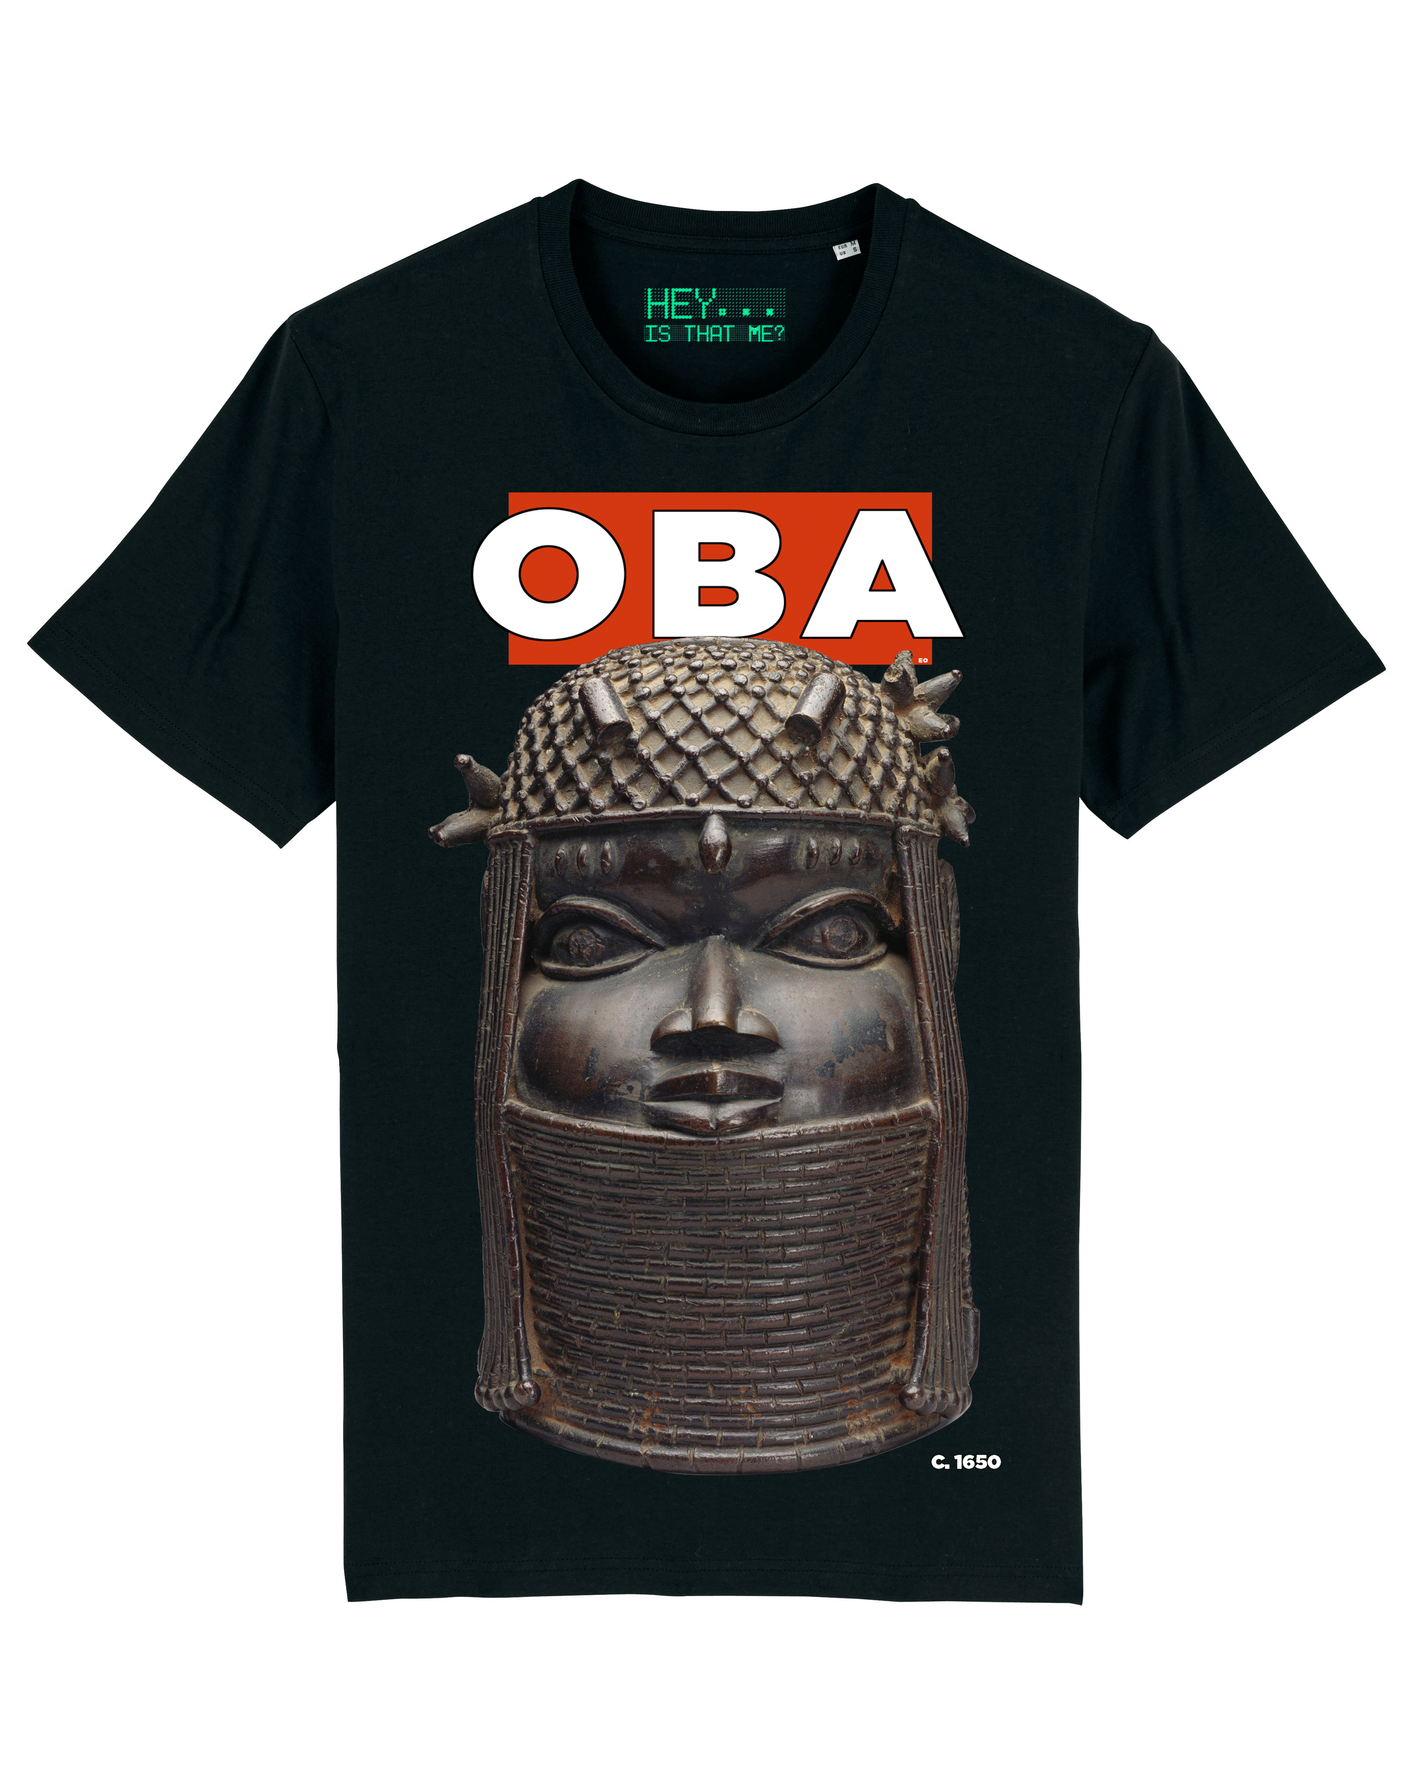 A solid bronze  stolen artefact, known as "Oba" -  The King, is depicted on this black, organic cotton t-shirt